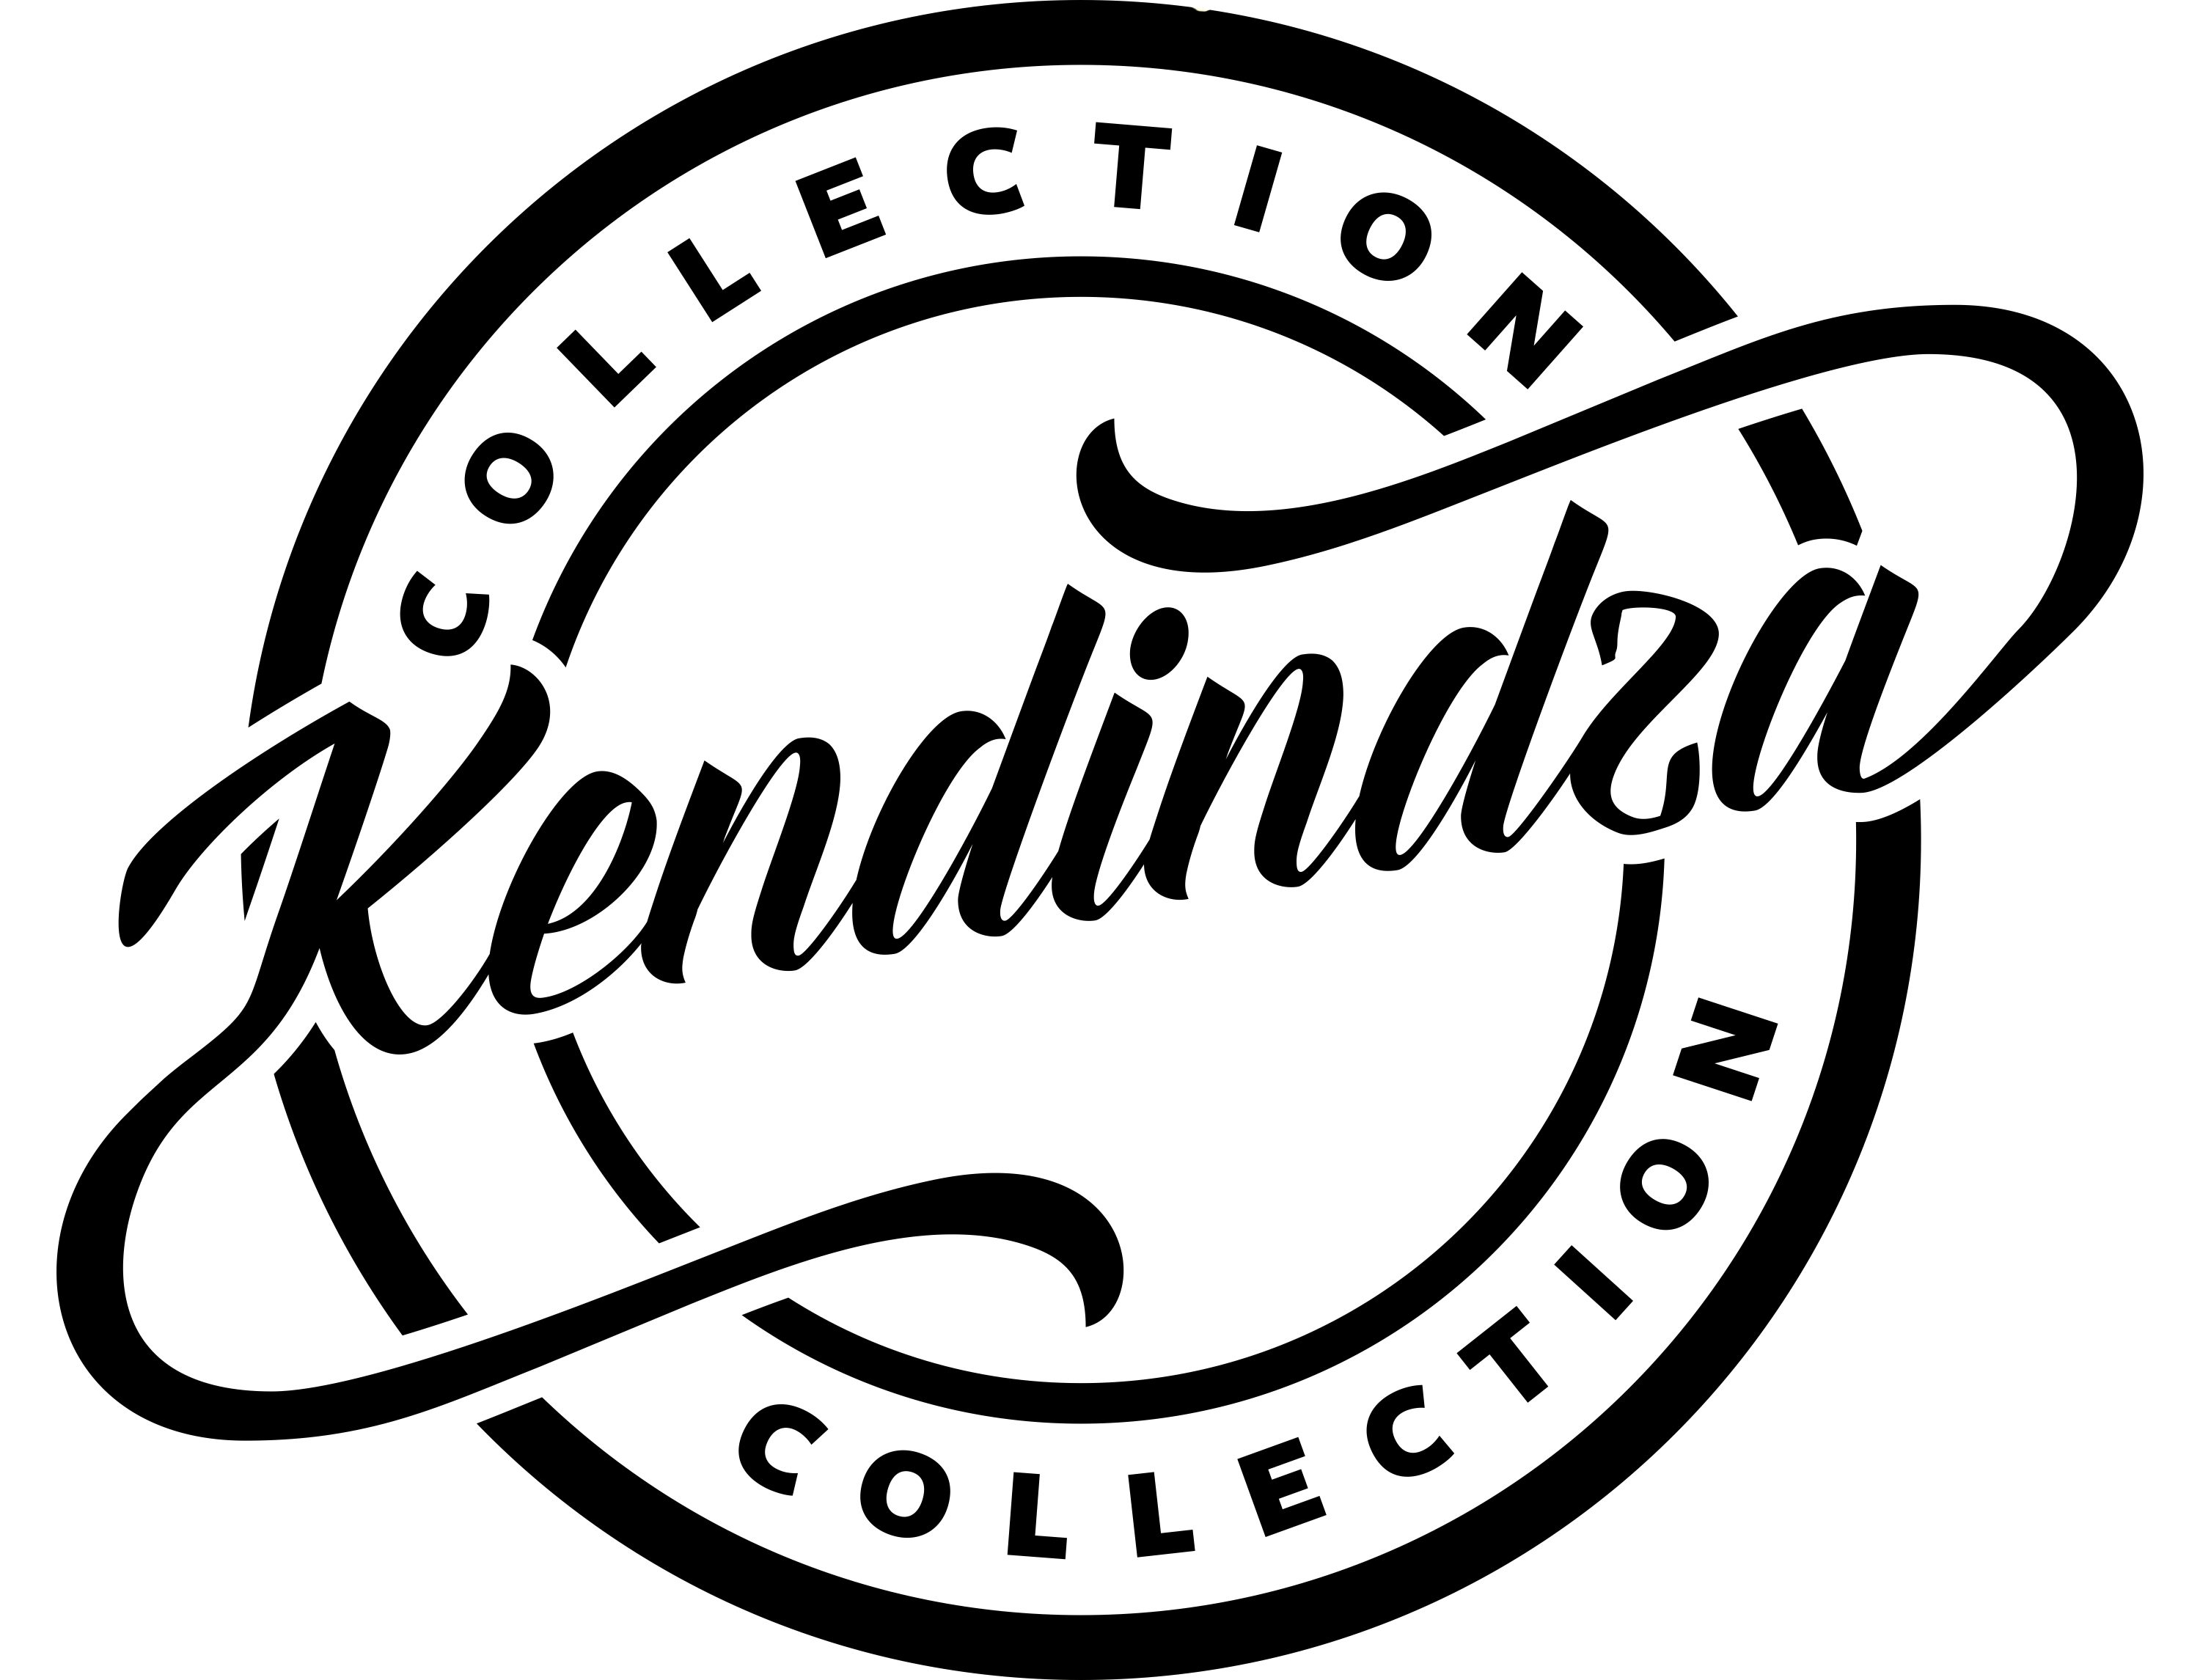 Kendindza Collection